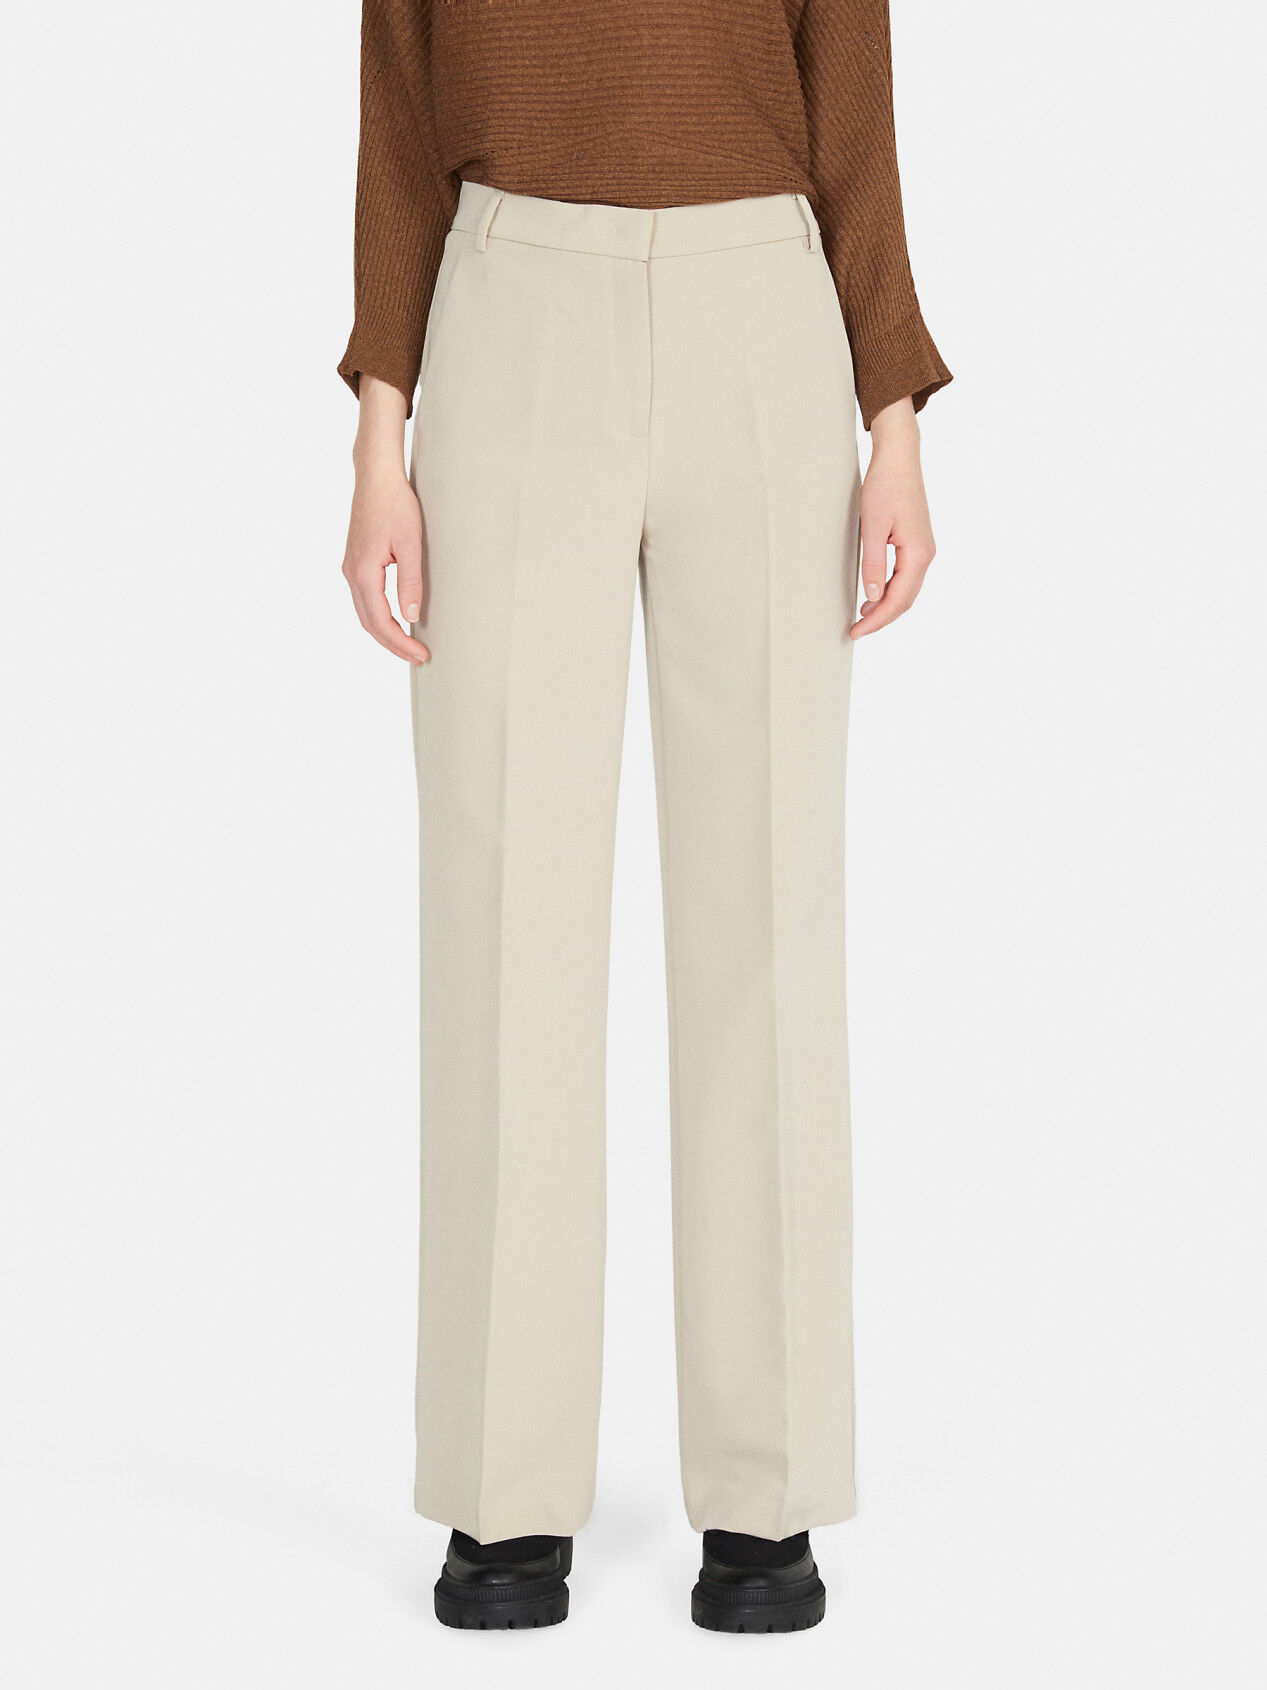 Express | Editor High Waisted Trouser Flare Pant in Blush Taupe | Express  Style Trial